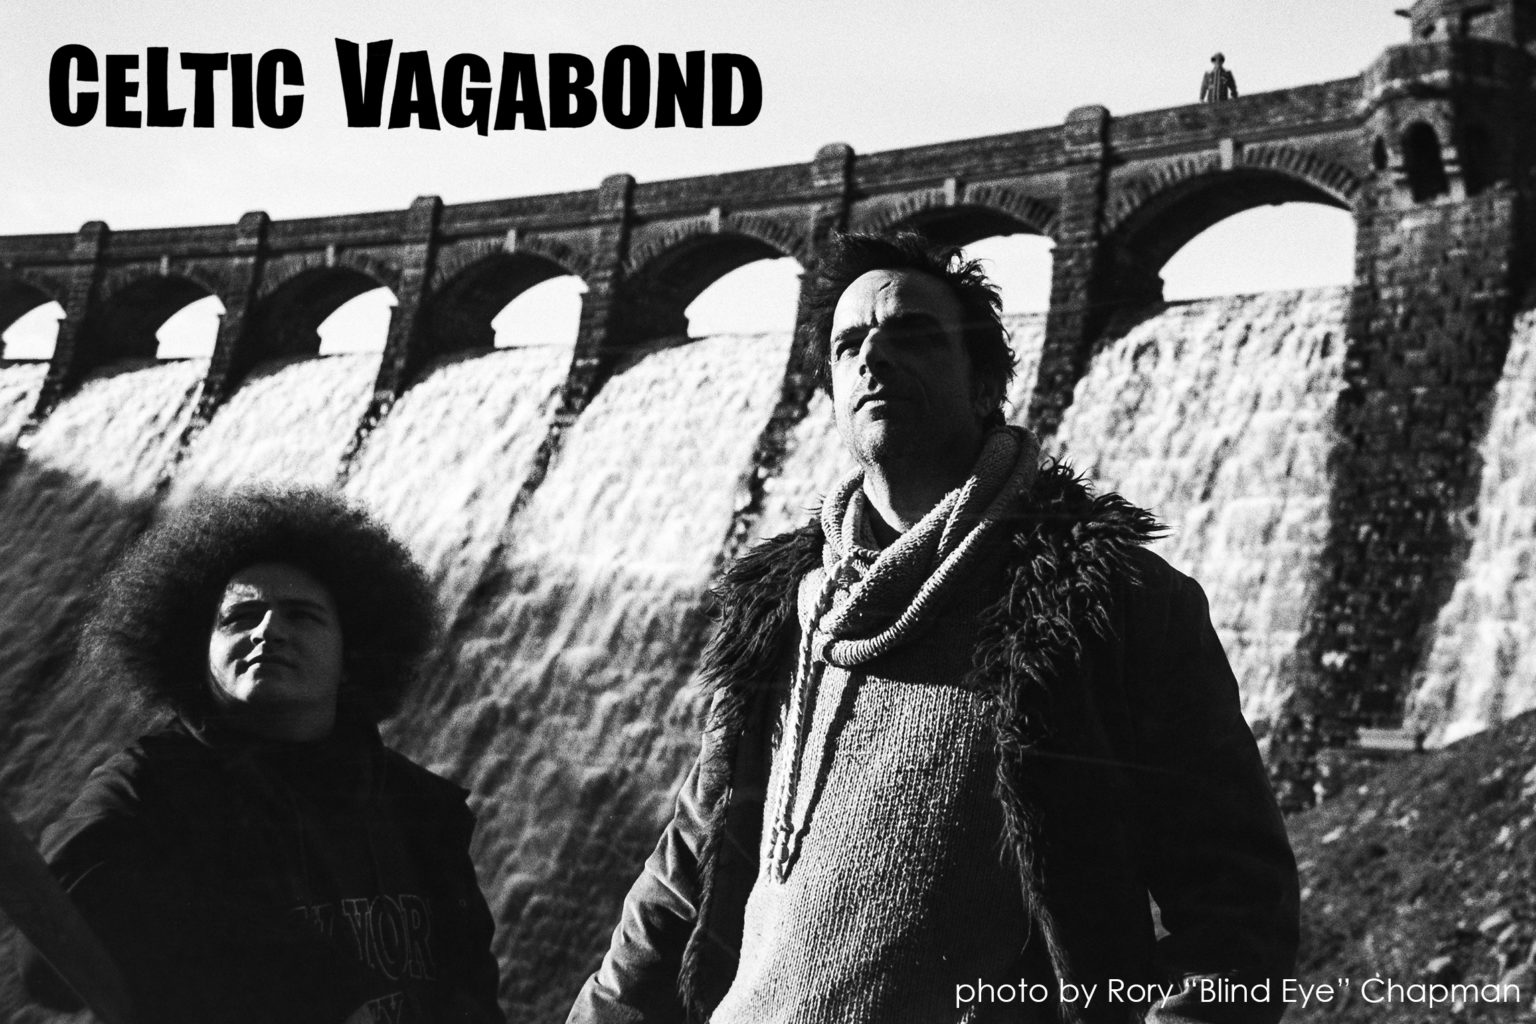 Paddy O’Turner and The Celtic Vagabond